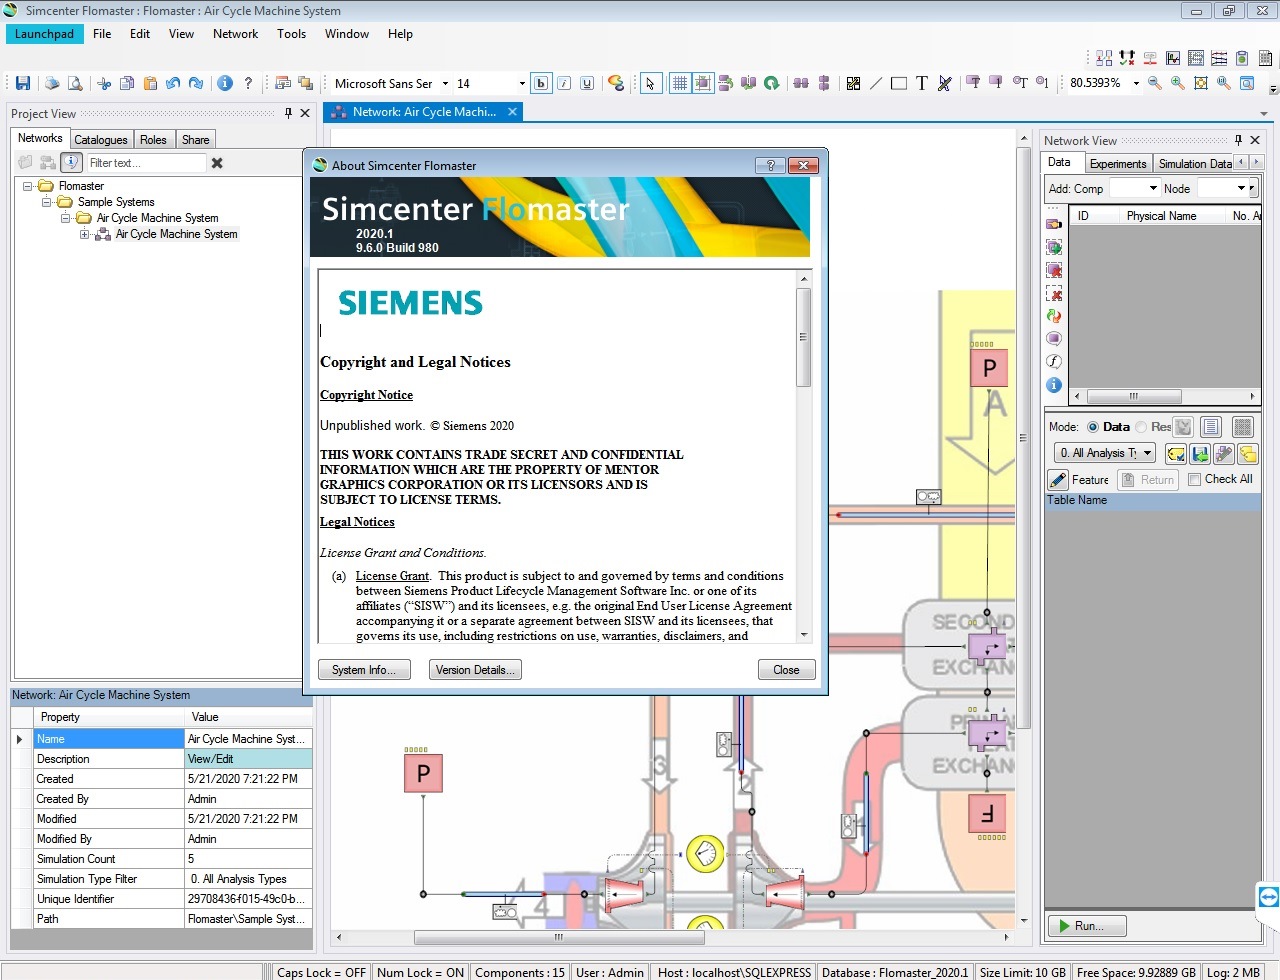 Working with Siemens Simcenter Flomaster 2020.1 full license